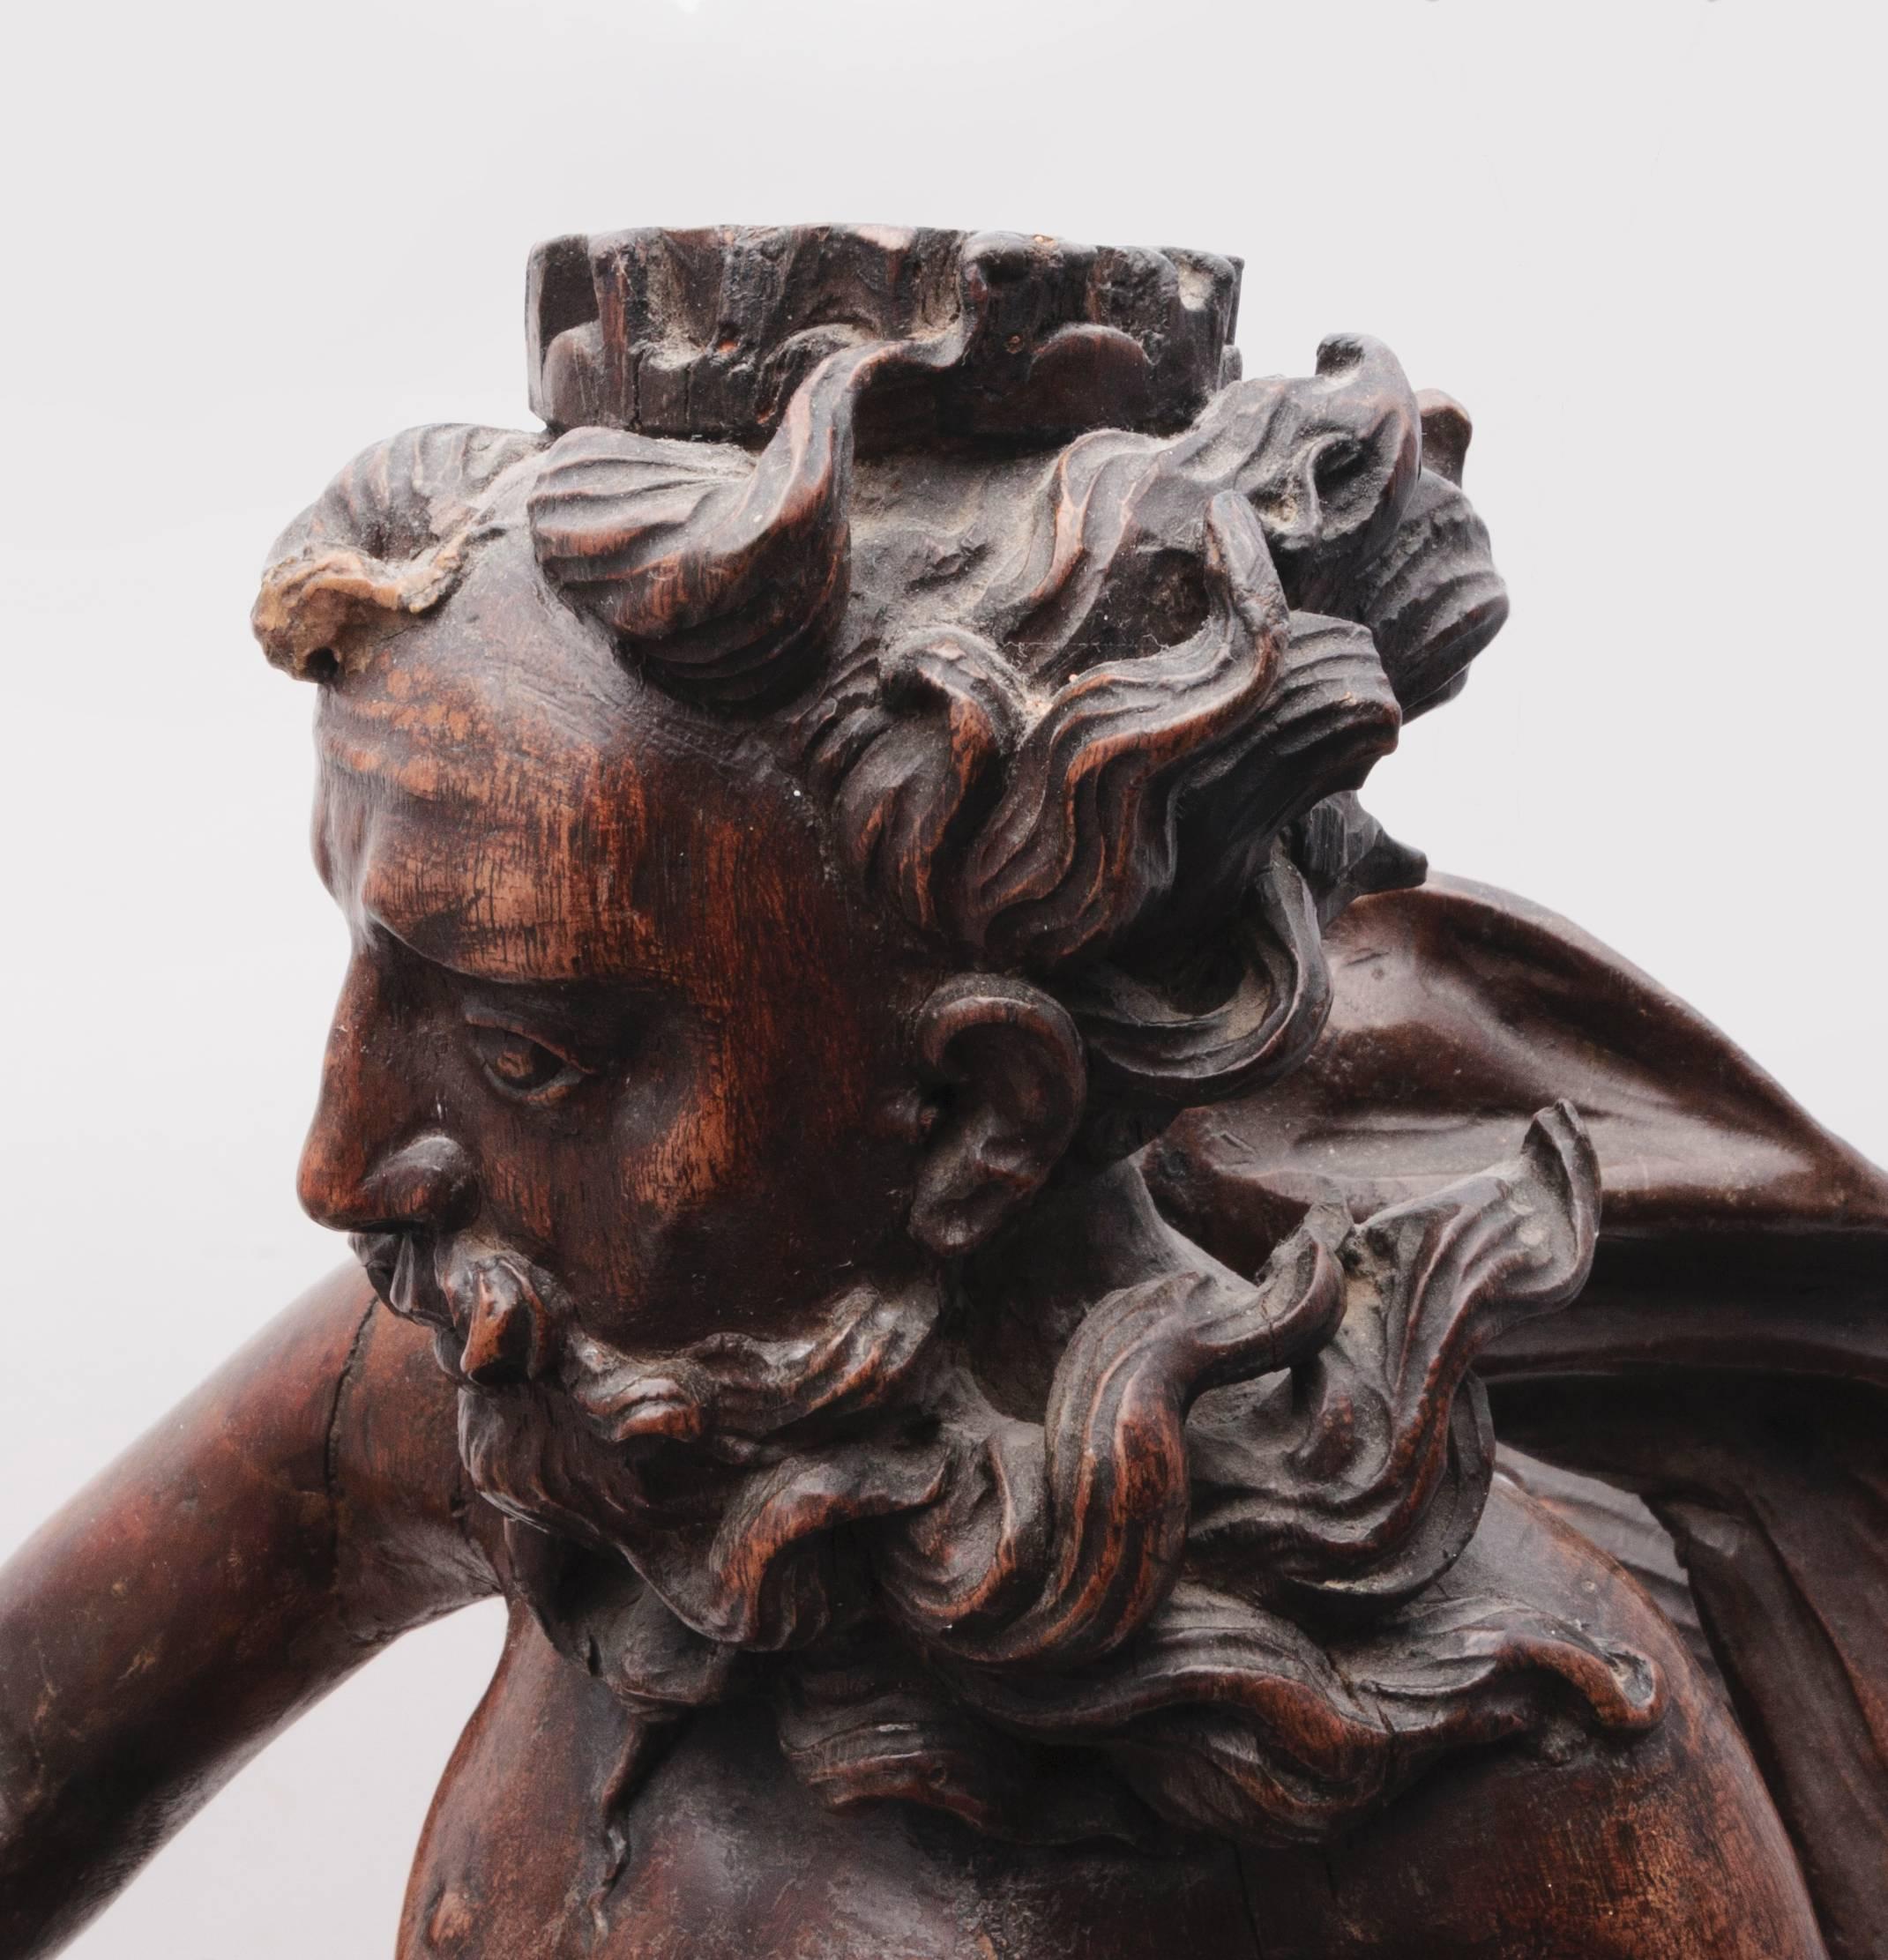 Beautiful 18th Century Wood Carved Figure of Poseidon.  Poseidon was the Olympian god of the sea, earthquakes, floods, drought and horses.
He was depicted as a mature man with a sturdy build and dark beard holding a trident (a three-pronged